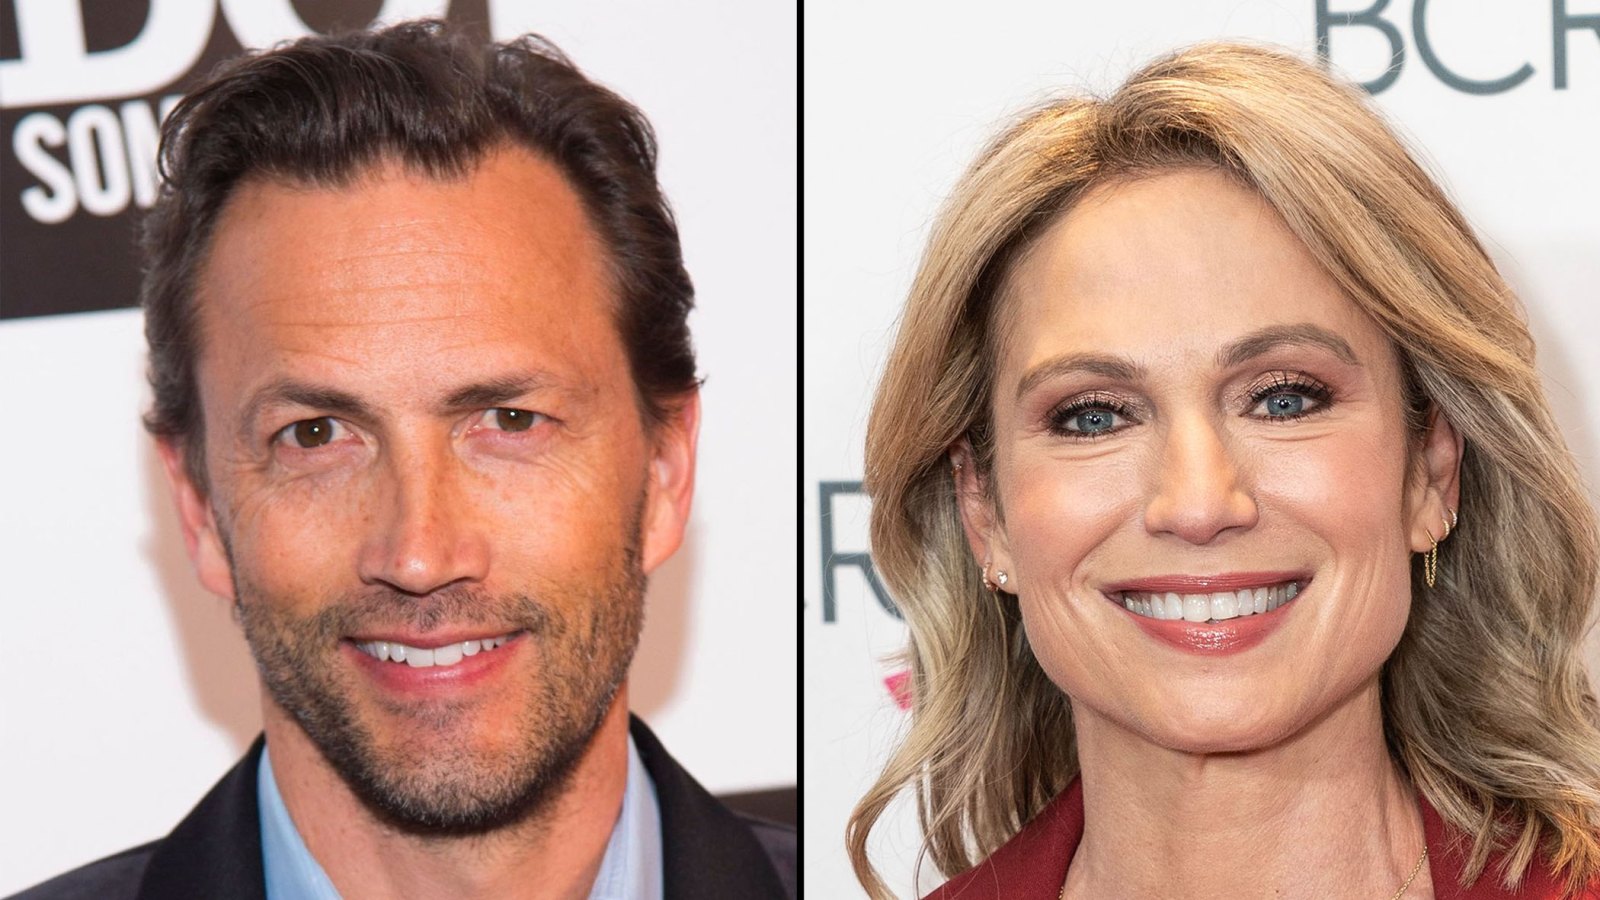 Andrew Shue Detailed 'Happy Ending' With Amy Robach 1 Year Before Scandal